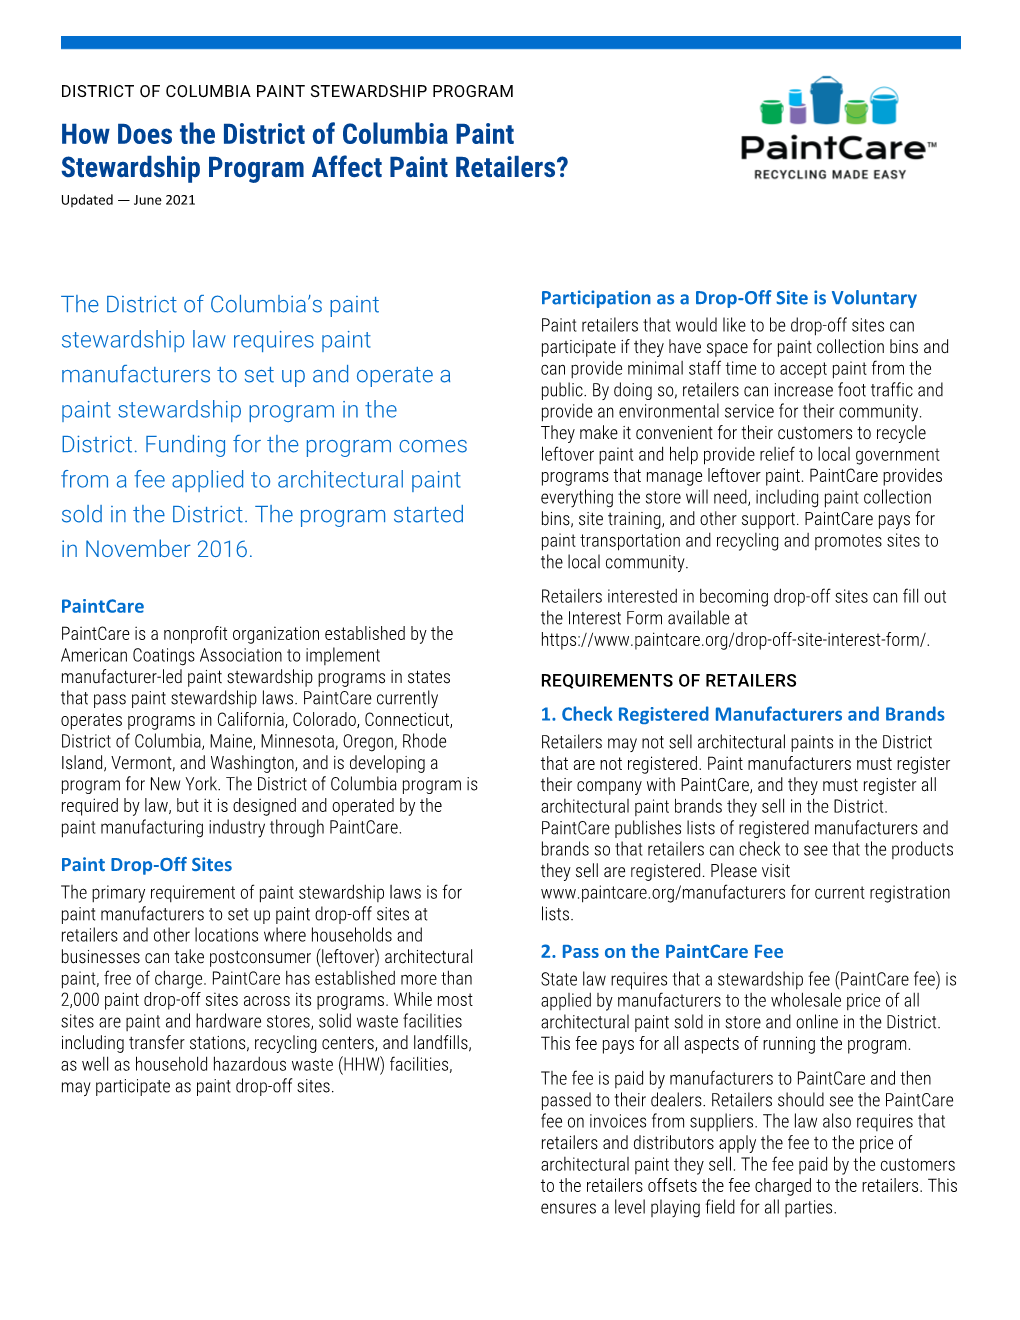 How Does the District of Columbia Paint Stewardship Program Affect Paint Retailers? Updated — June 2021